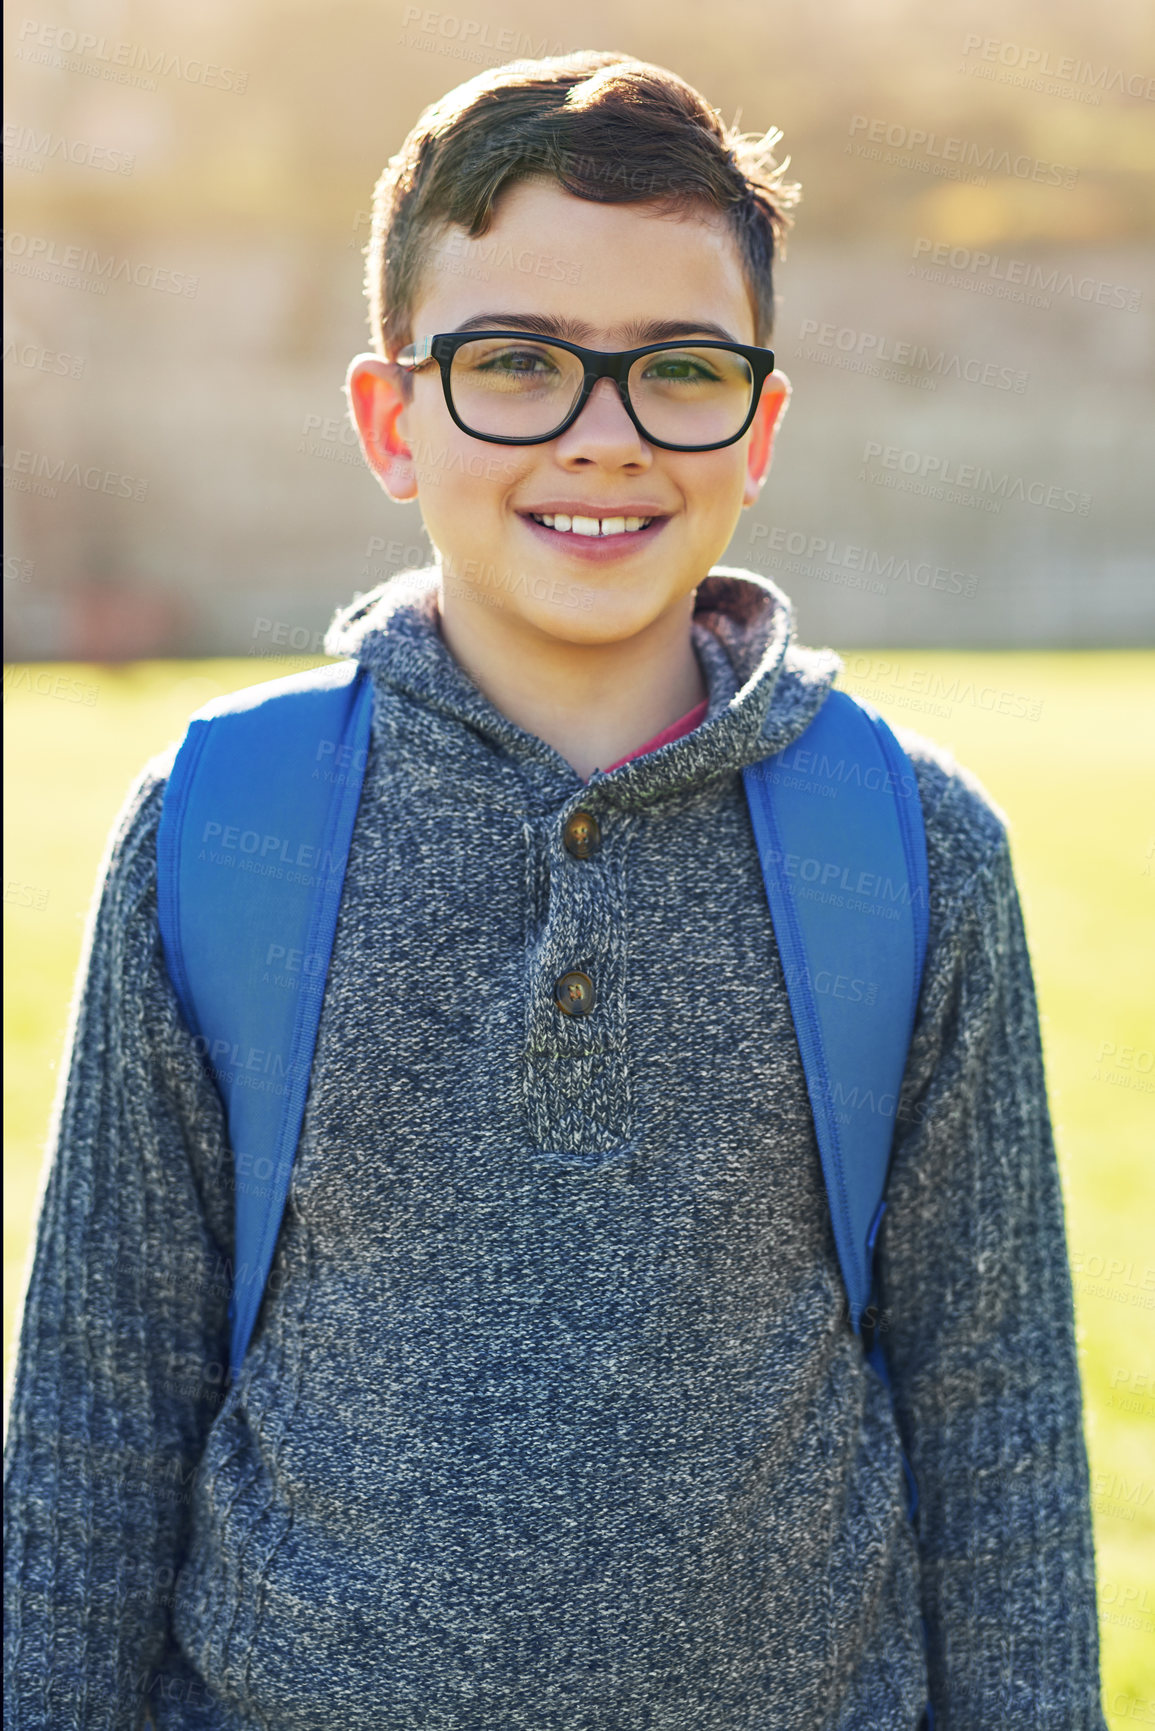 Buy stock photo Portrait of an elementary schoolboy standing on the school lawn outside